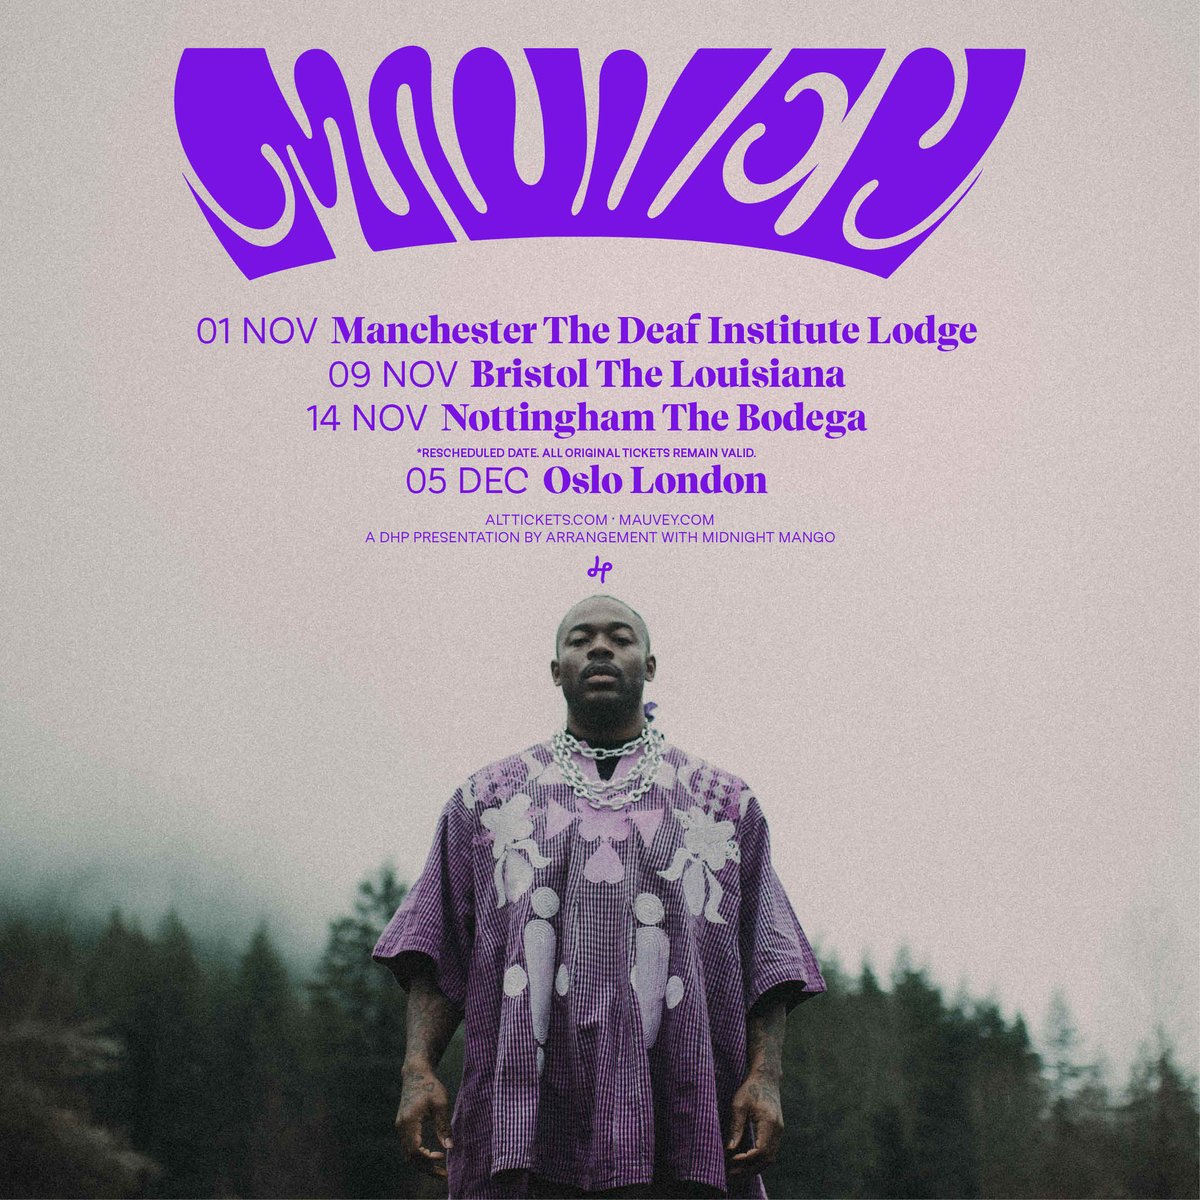 NEW/ Genre-spanning artist @lovemauvey is heading out on tour later this year! See him live at @DeafInstitute, @LouisianaBris, @bodeganotts and @OsloHackney. Tickets go on sale this Friday at 10am, set a reminder: tinyurl.com/4wnyr9n5